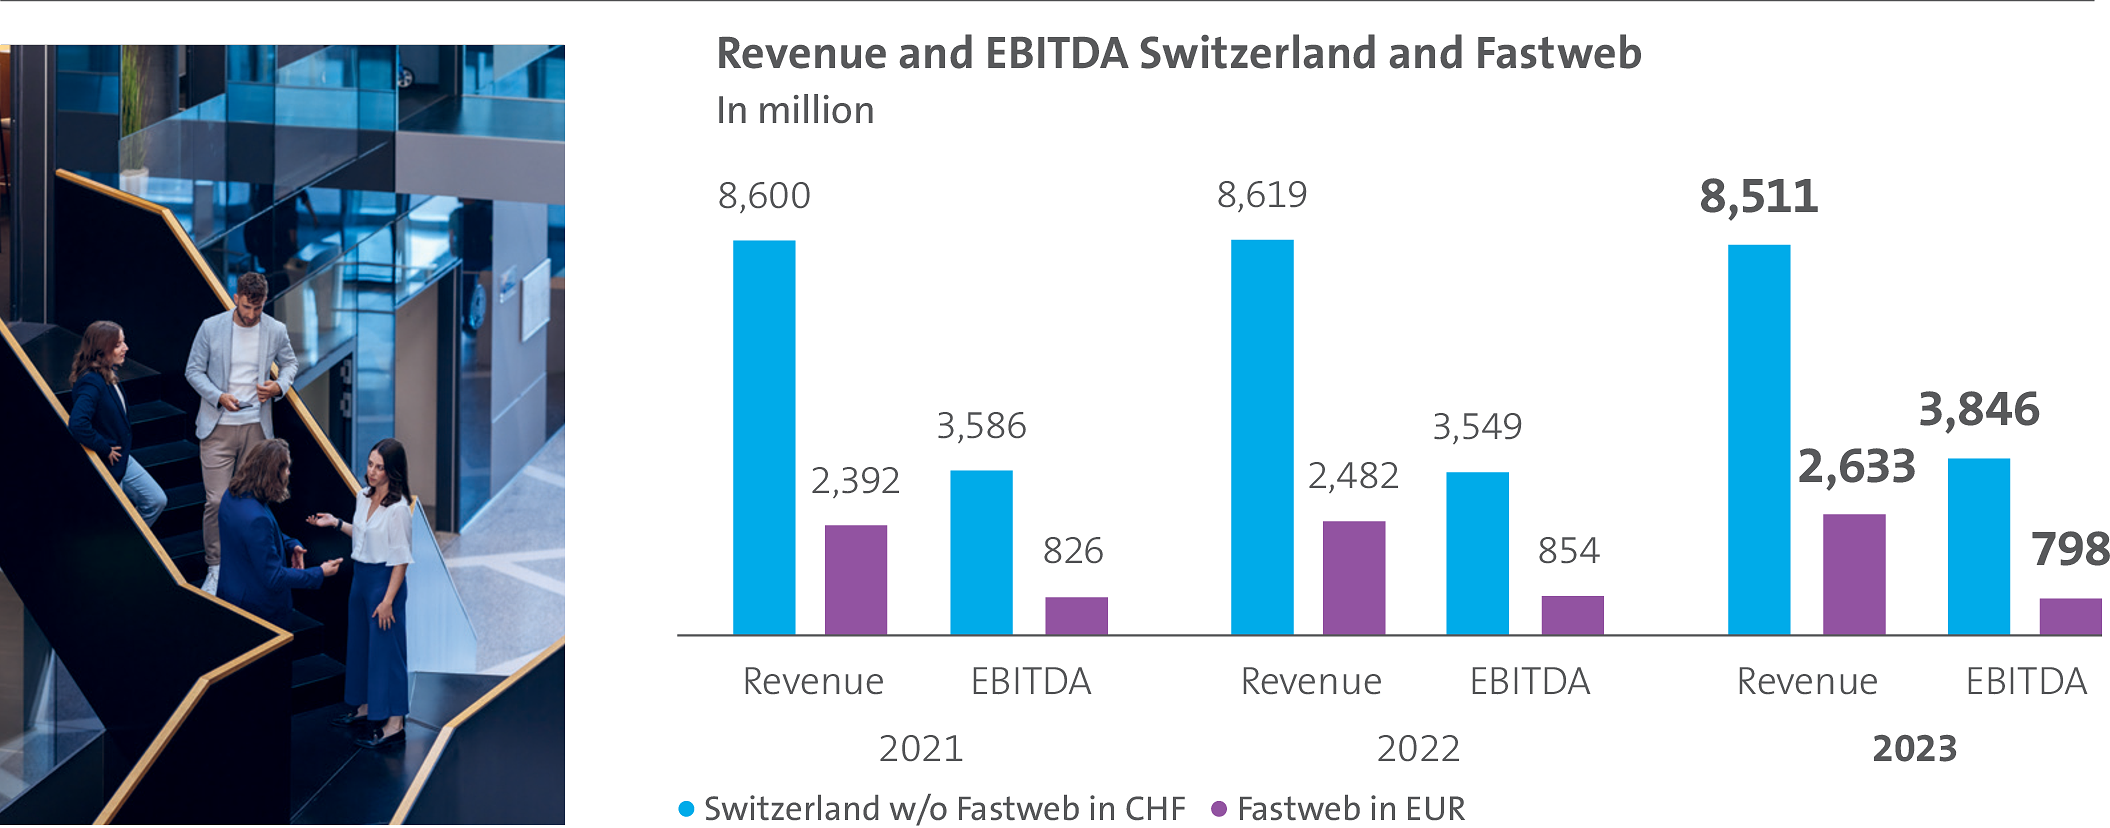 The bar chart shows the revenue and EBITDA of Switzer­land and Fastweb over the last three years.